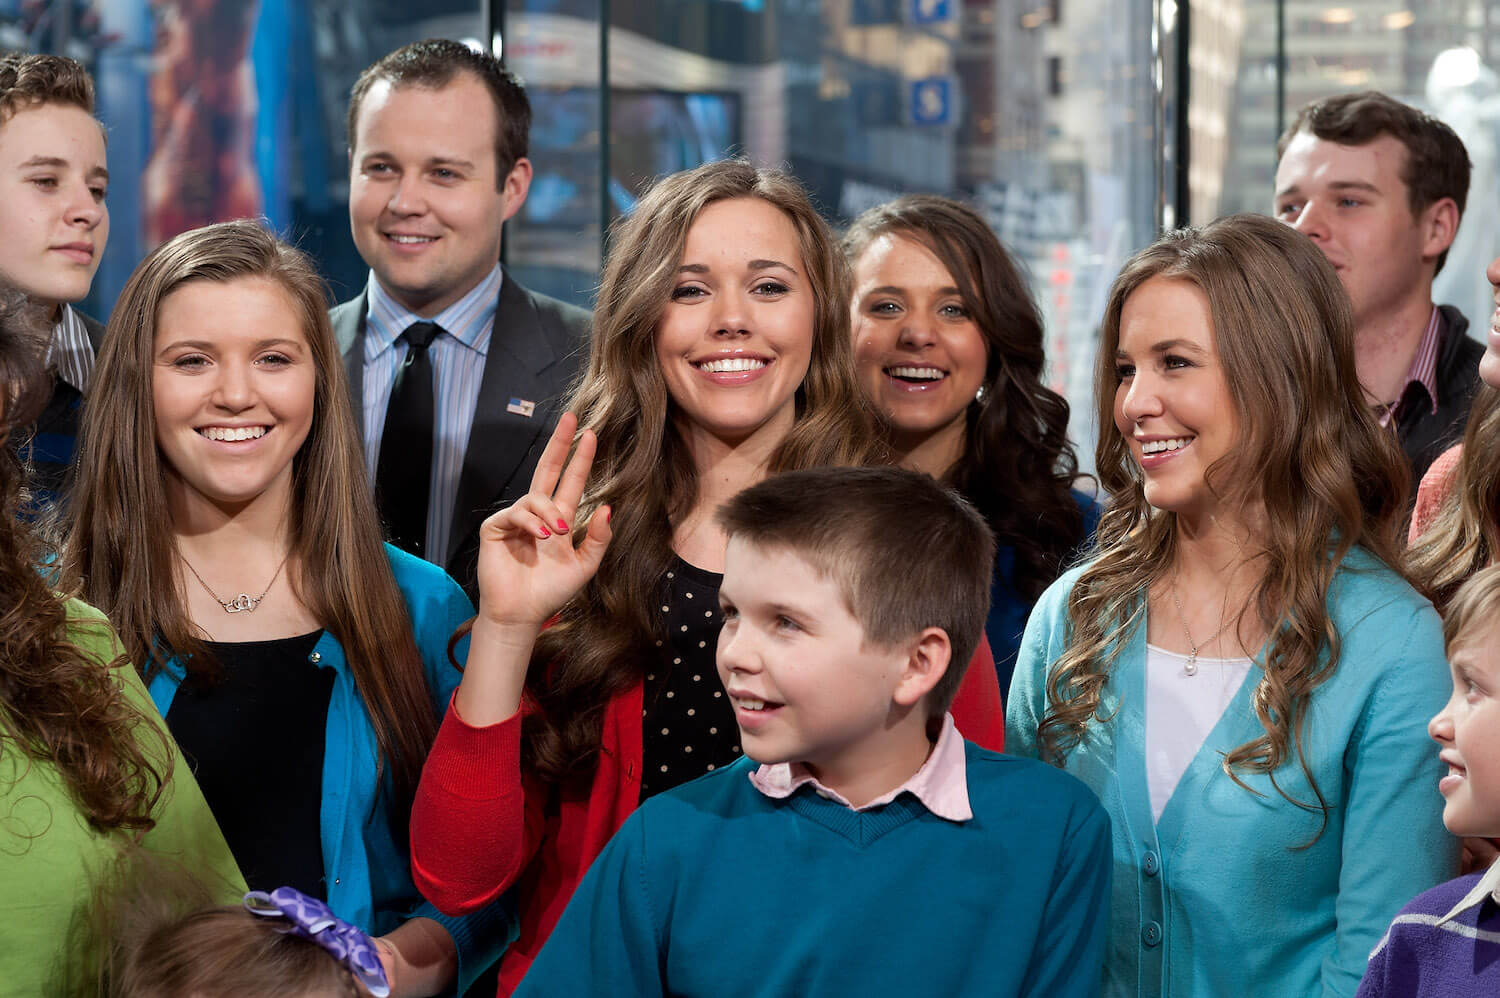 Jessa Duggar holding up a peace sign while surrounded by the Duggar family